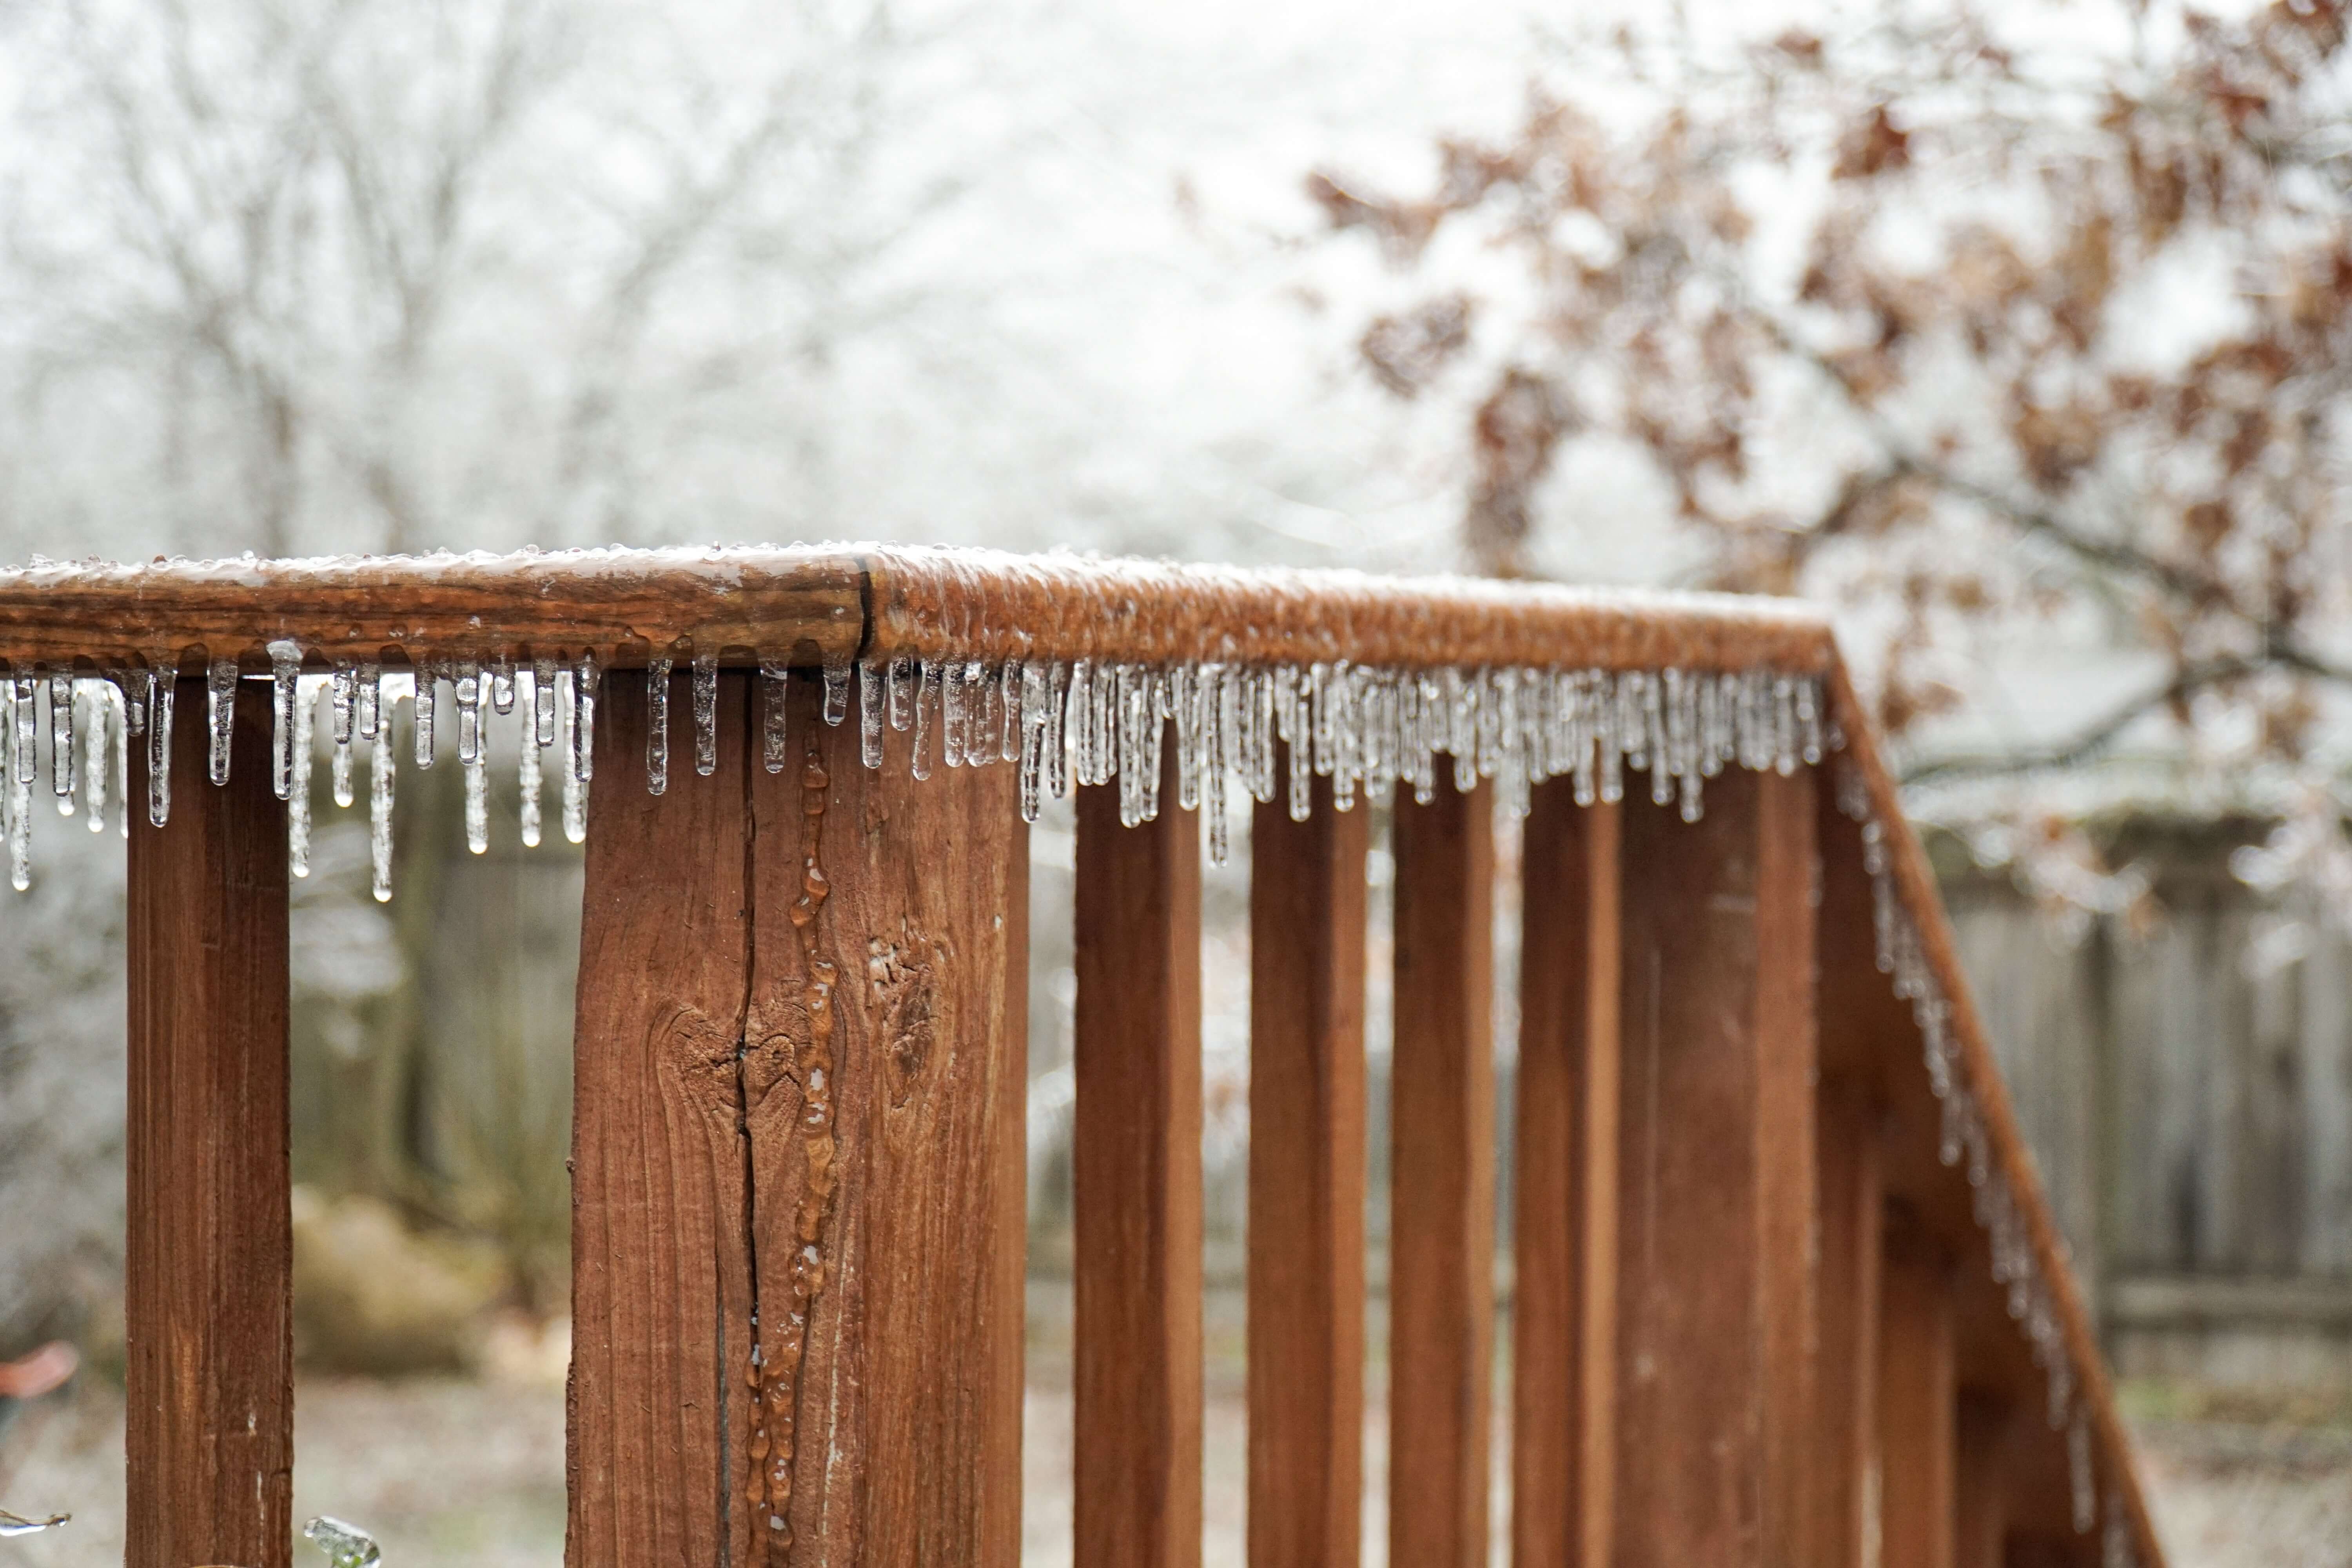 Wood staircase with icicles hanging off